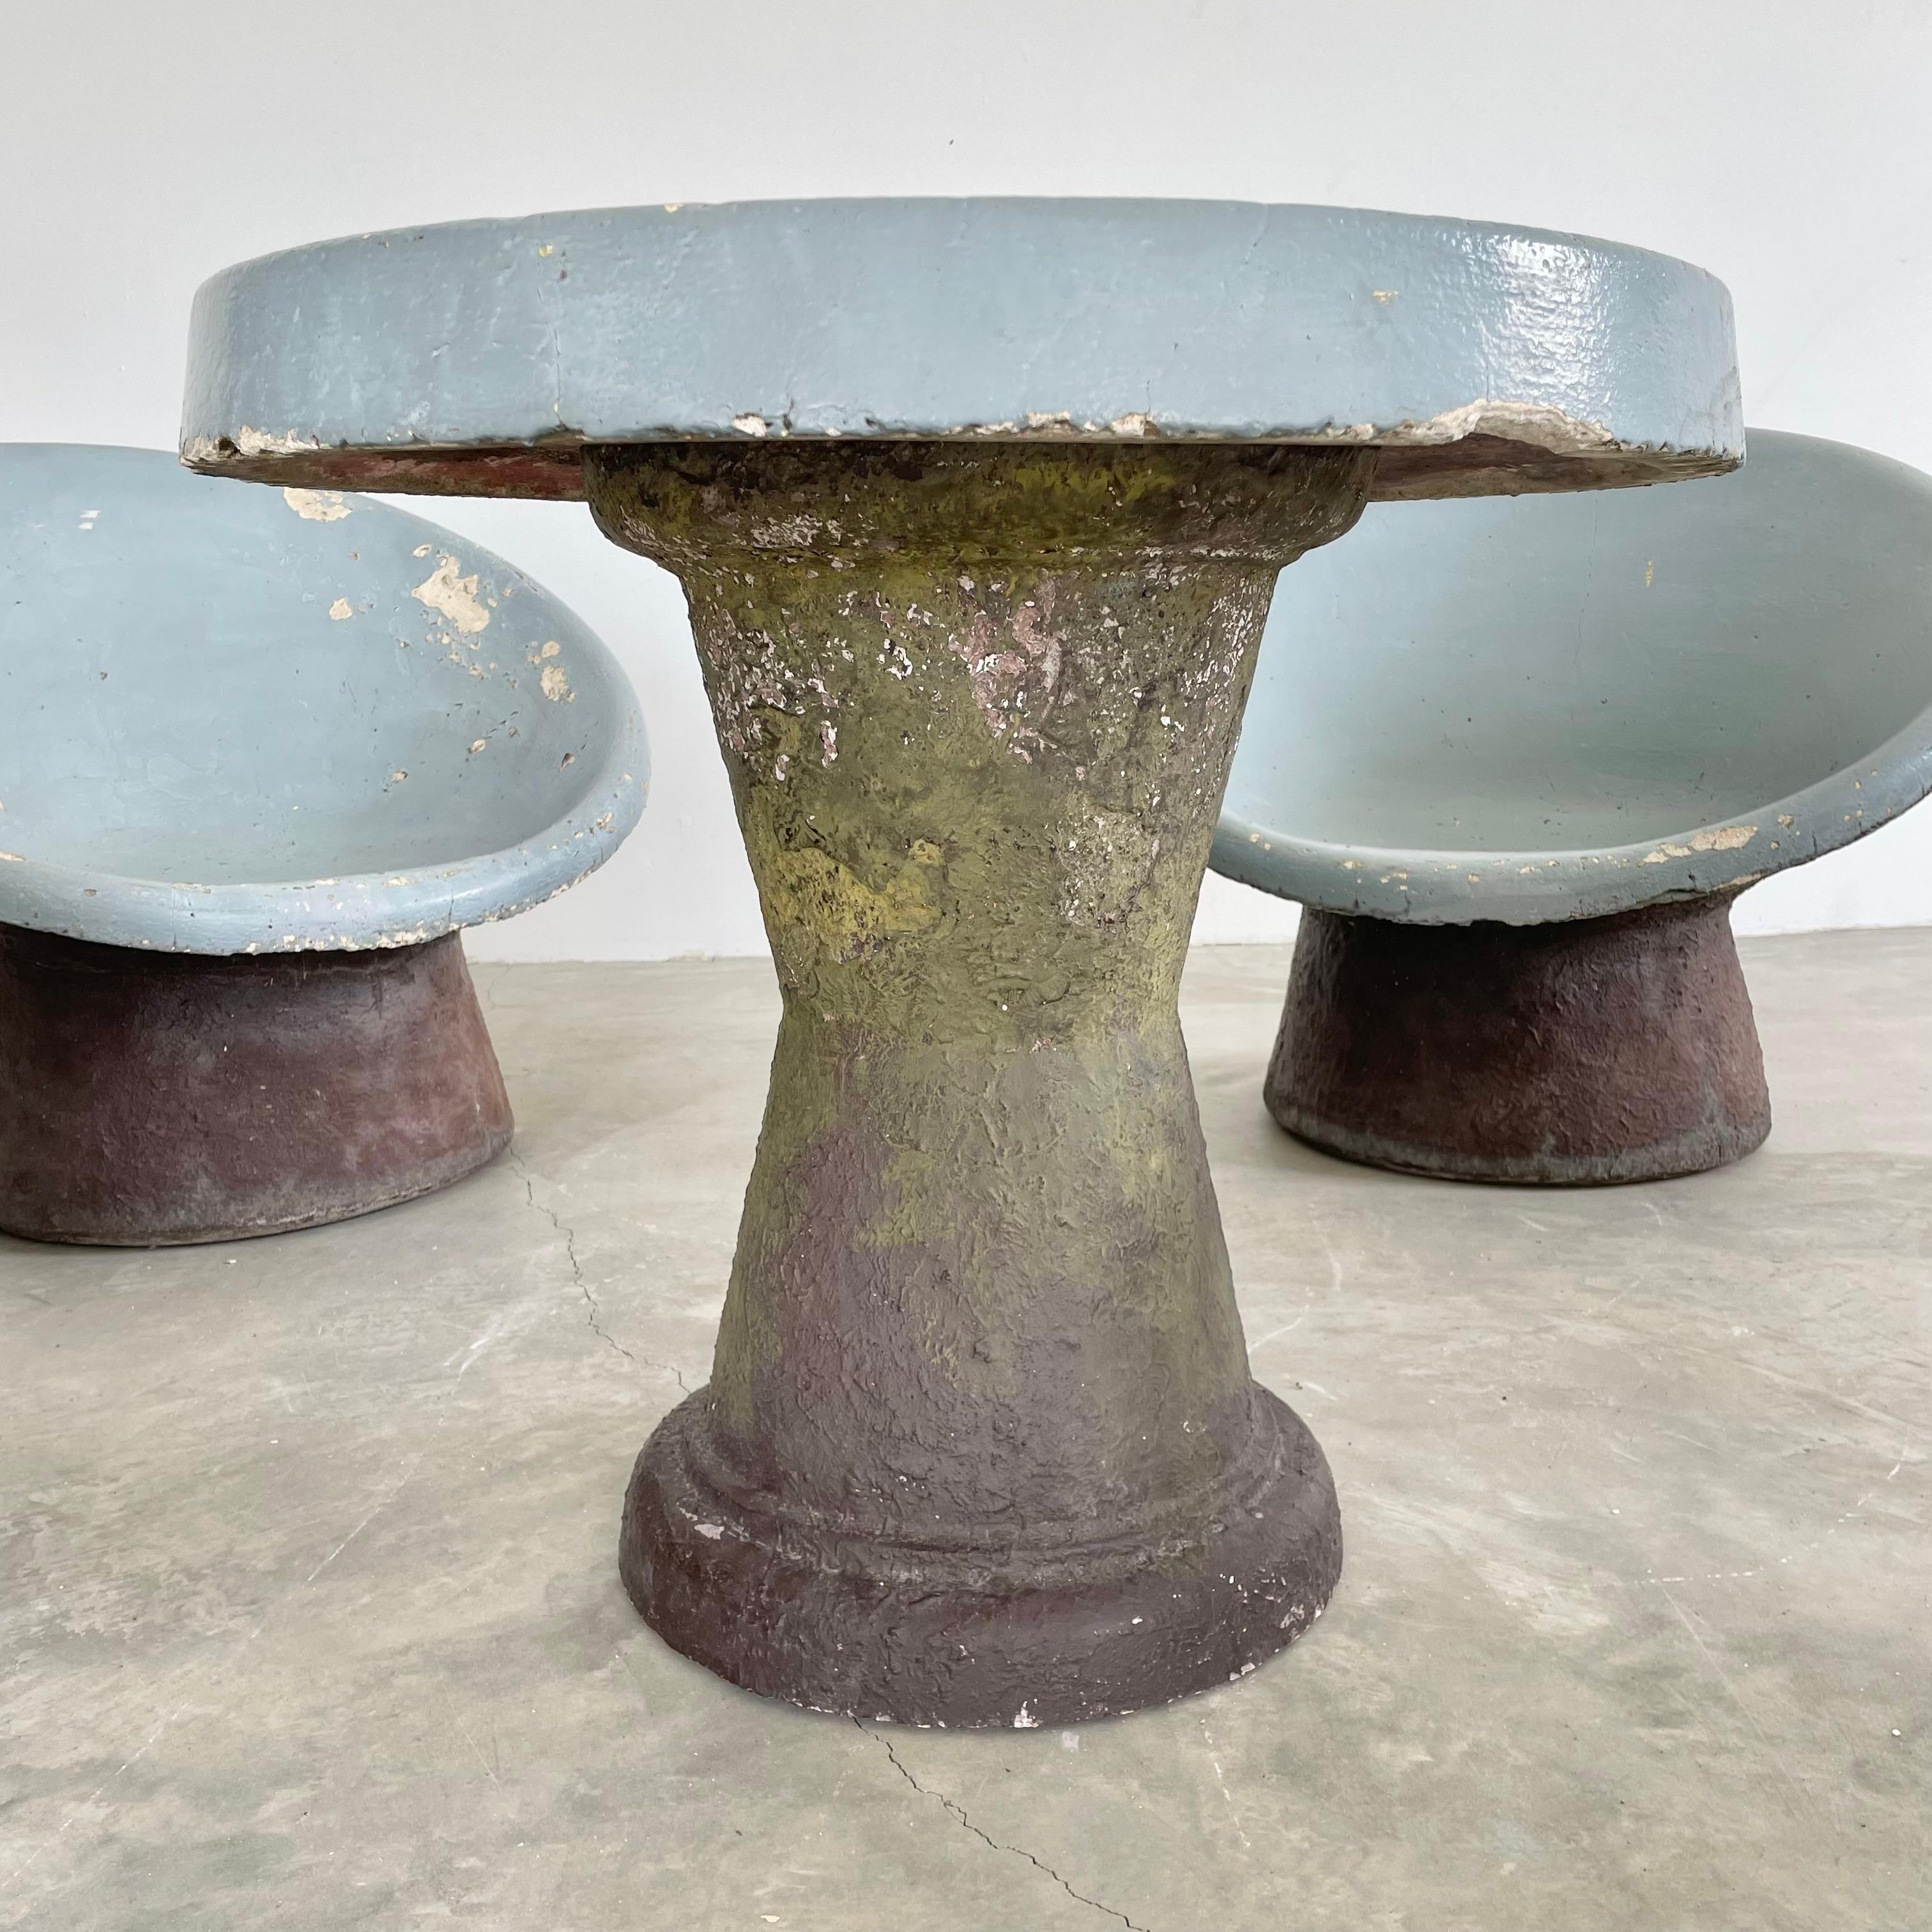 Sculptural Concrete Chairs and Table, 1960s, Switzerland For Sale 5